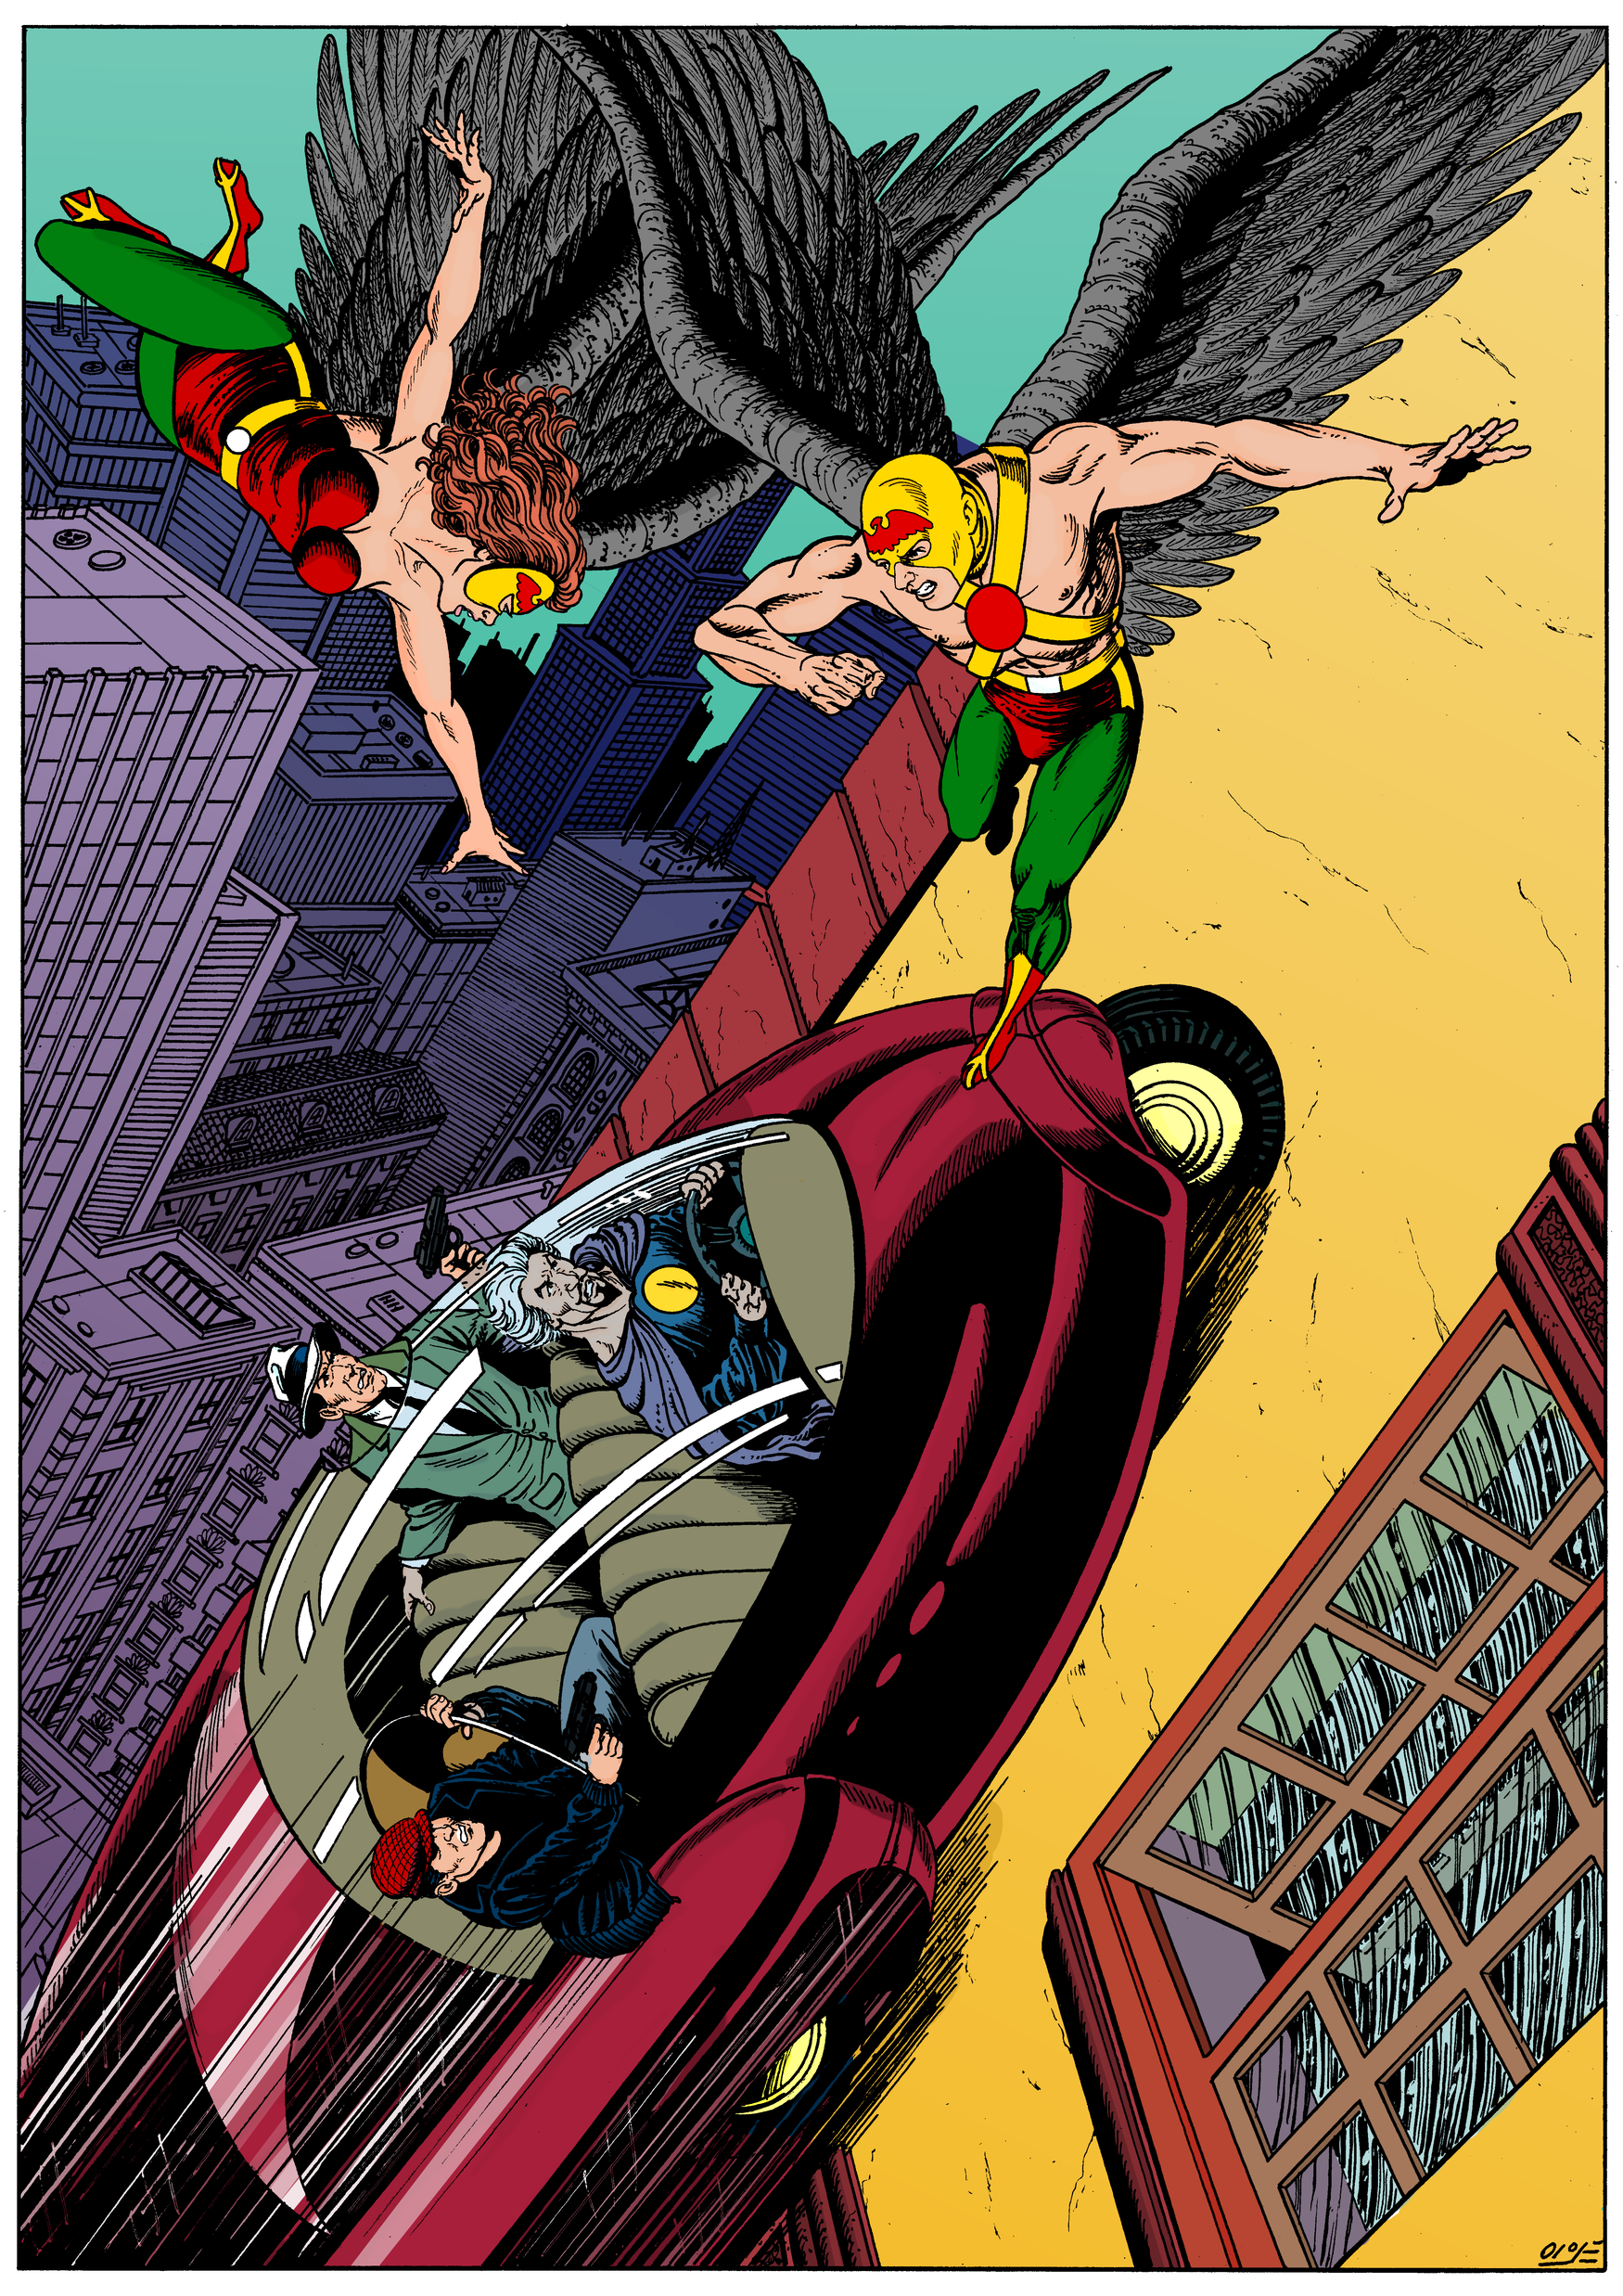 hawkman vs the human fly bandits inks color resize